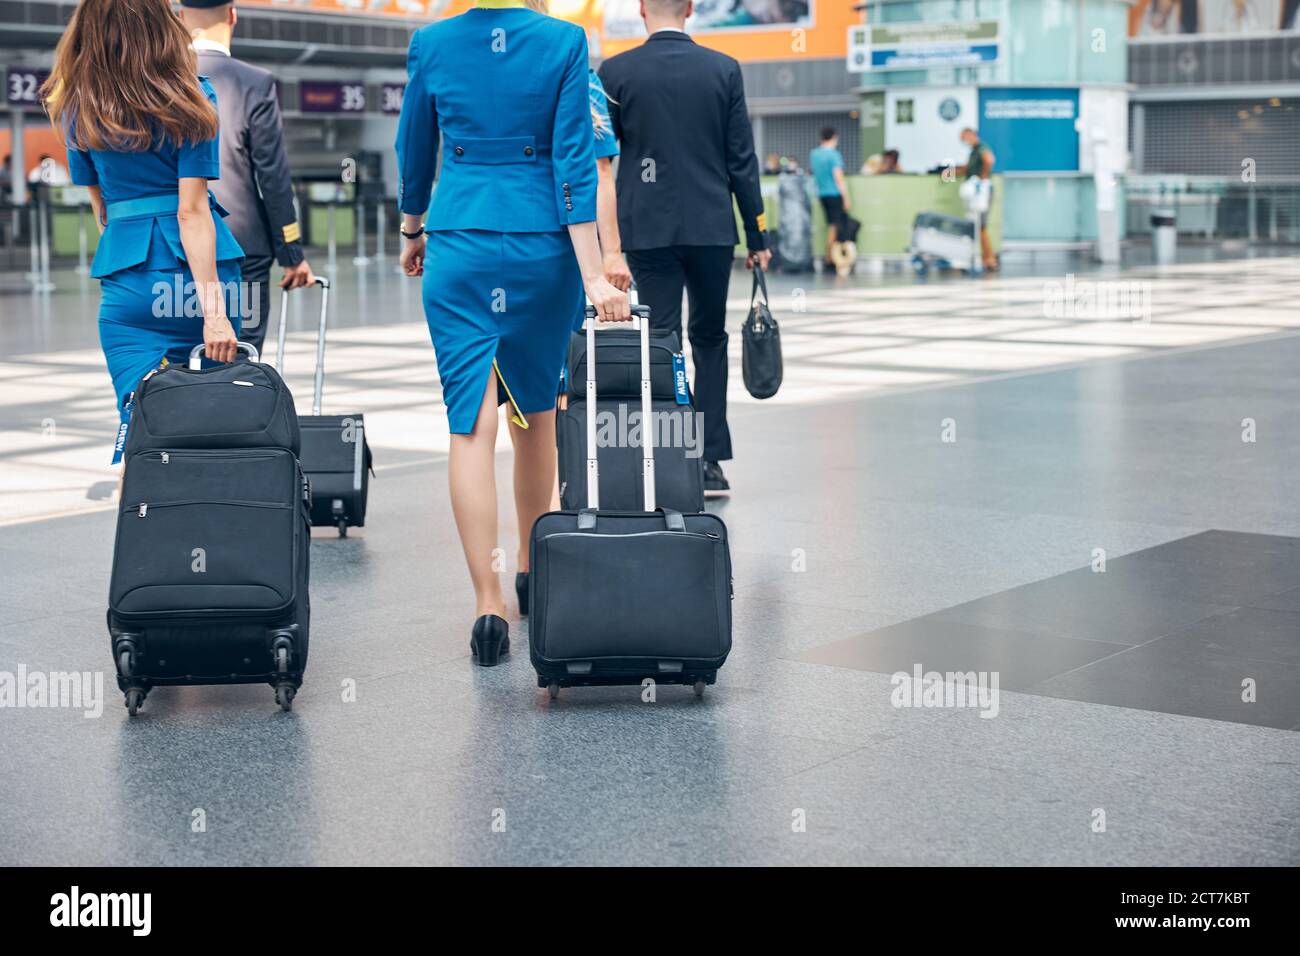 Aircrew members carrying travel suitcases in airport terminal Stock Photo